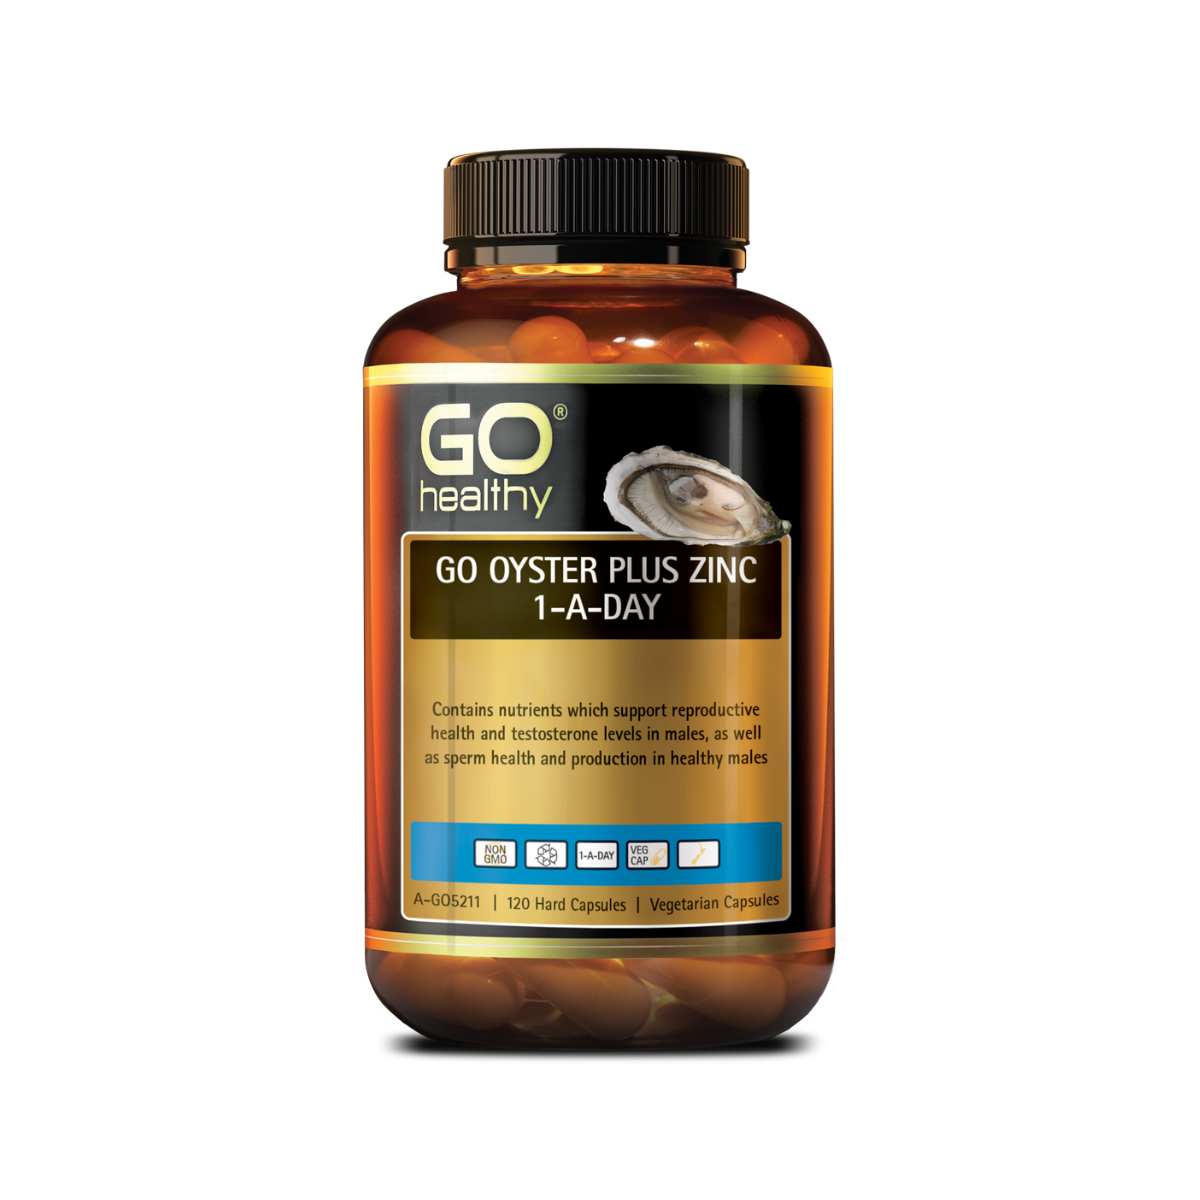  Go Healthy Oyster Plus Zinc 1-A-DAY 120 Capsules 